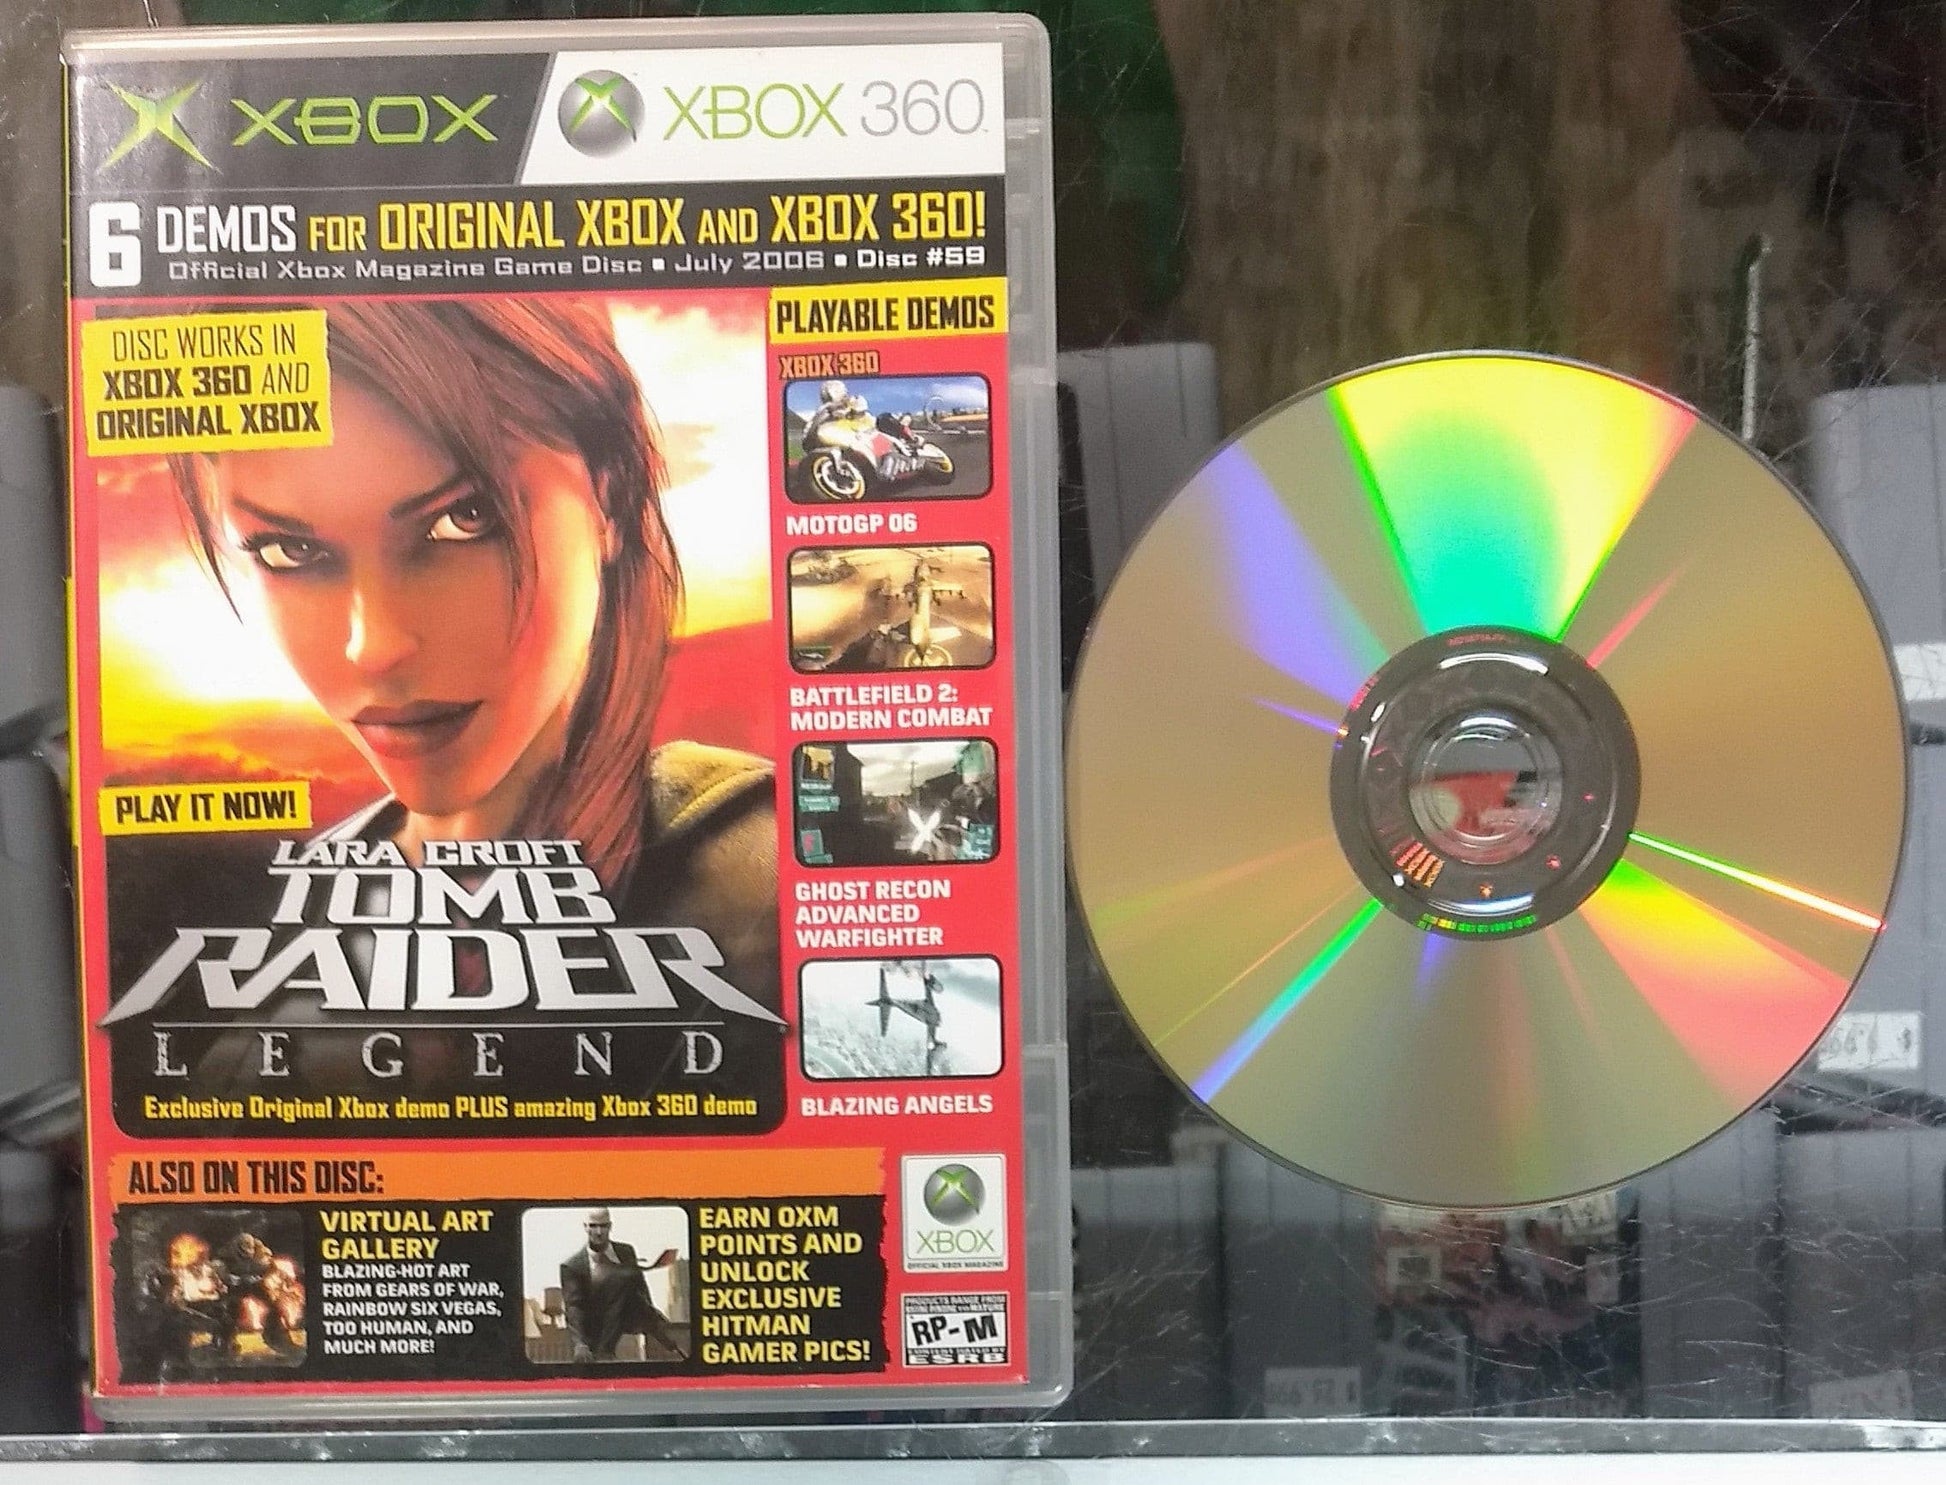 OFFICIAL XBOX MAGAZINE DEMO DISC 59 (XBOX 360 X360) - jeux video game-x